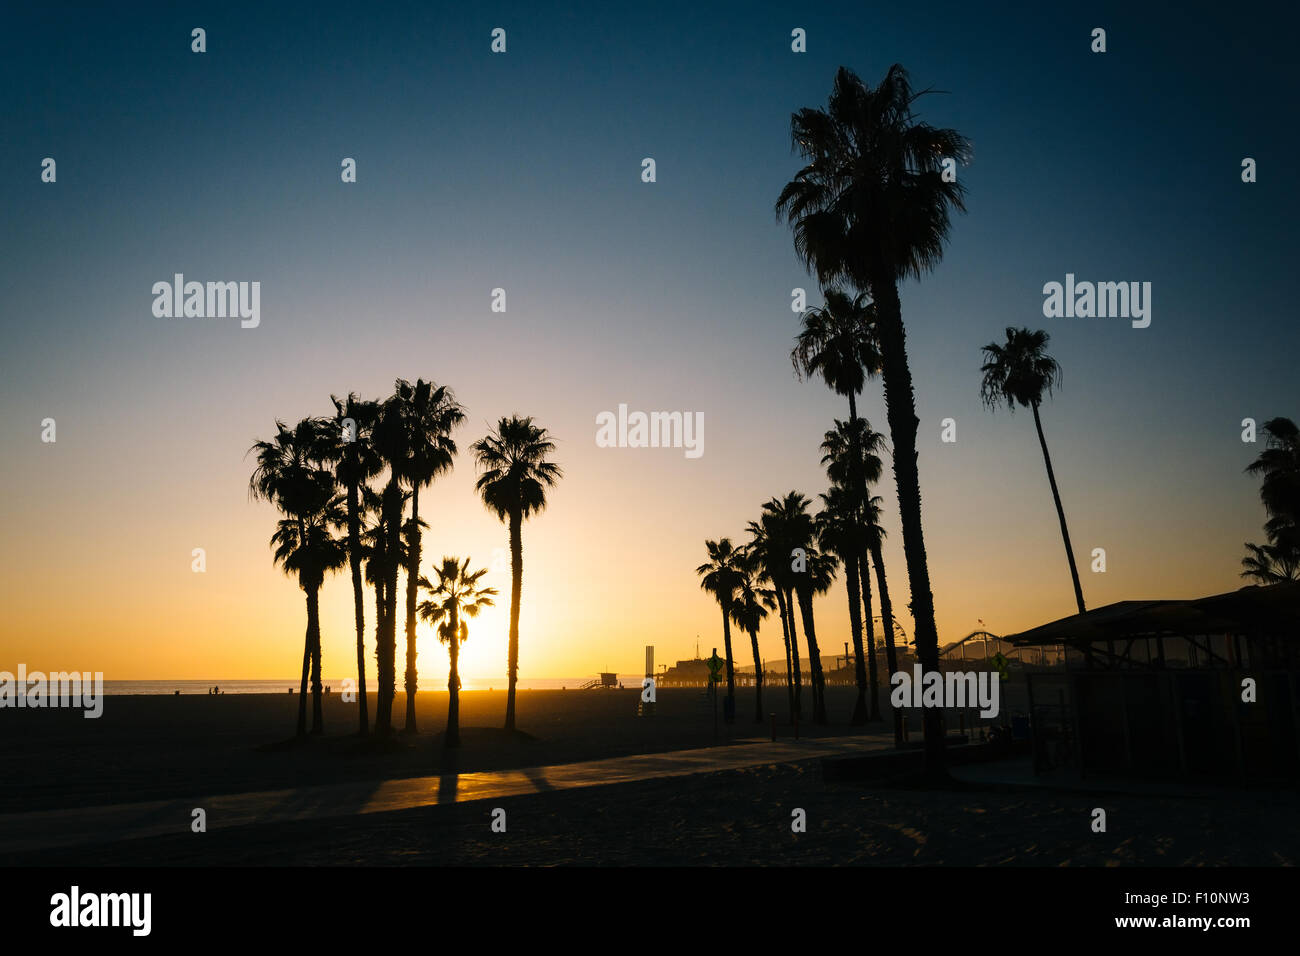 Palm trees on the beach at sunset in Santa Monica, California. Stock Photo